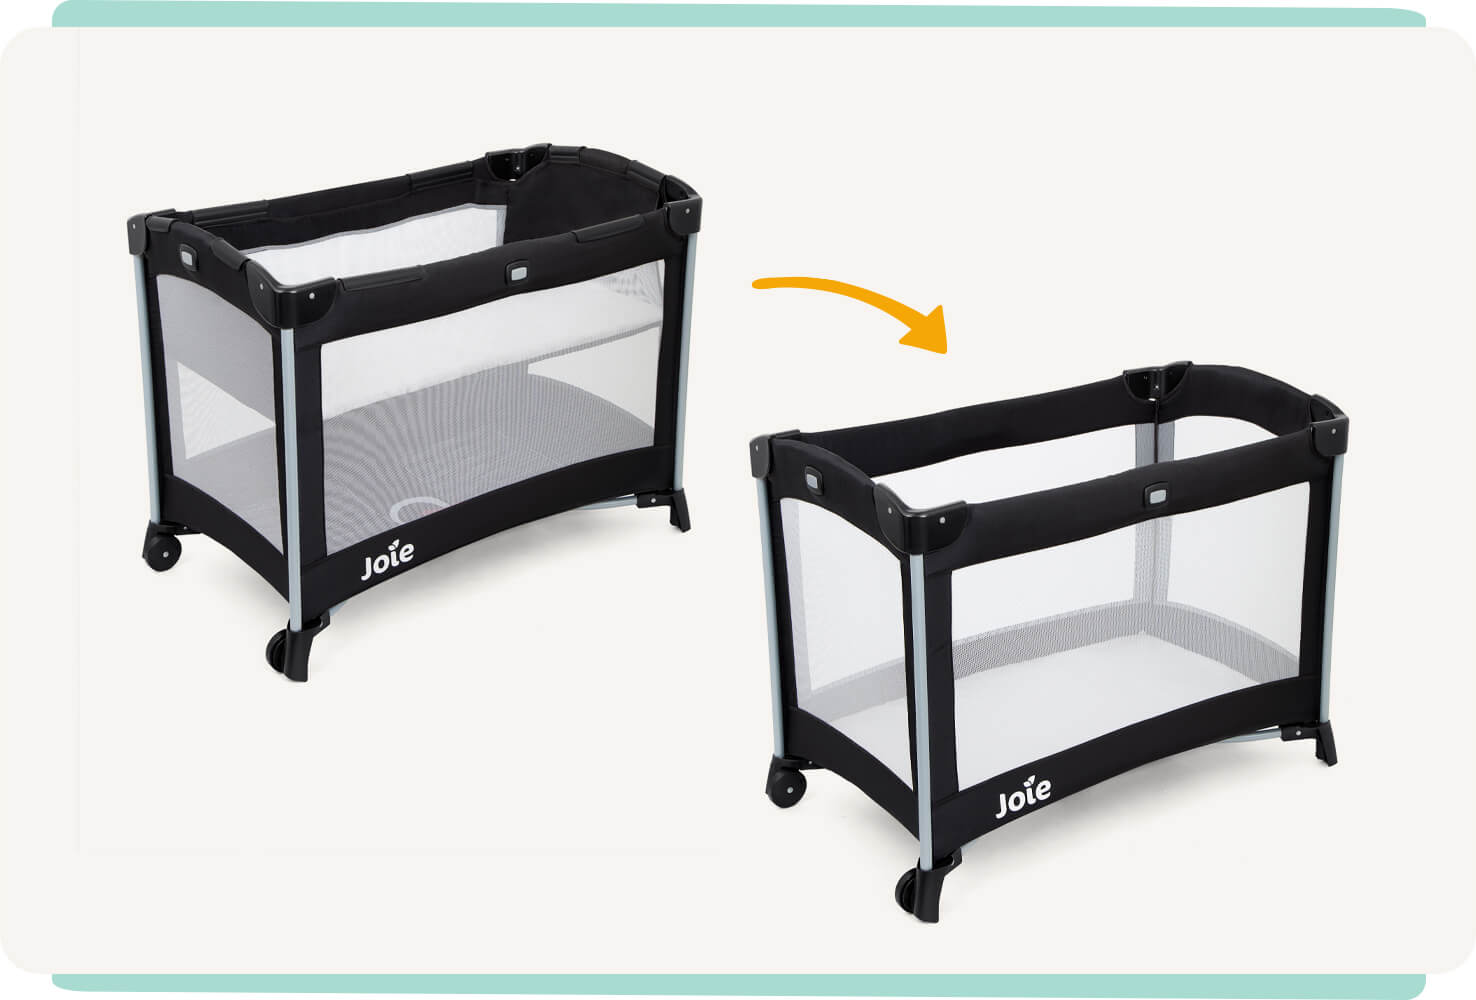 Two Joie Kubbie travel cots in black, one with bassinet and one without.